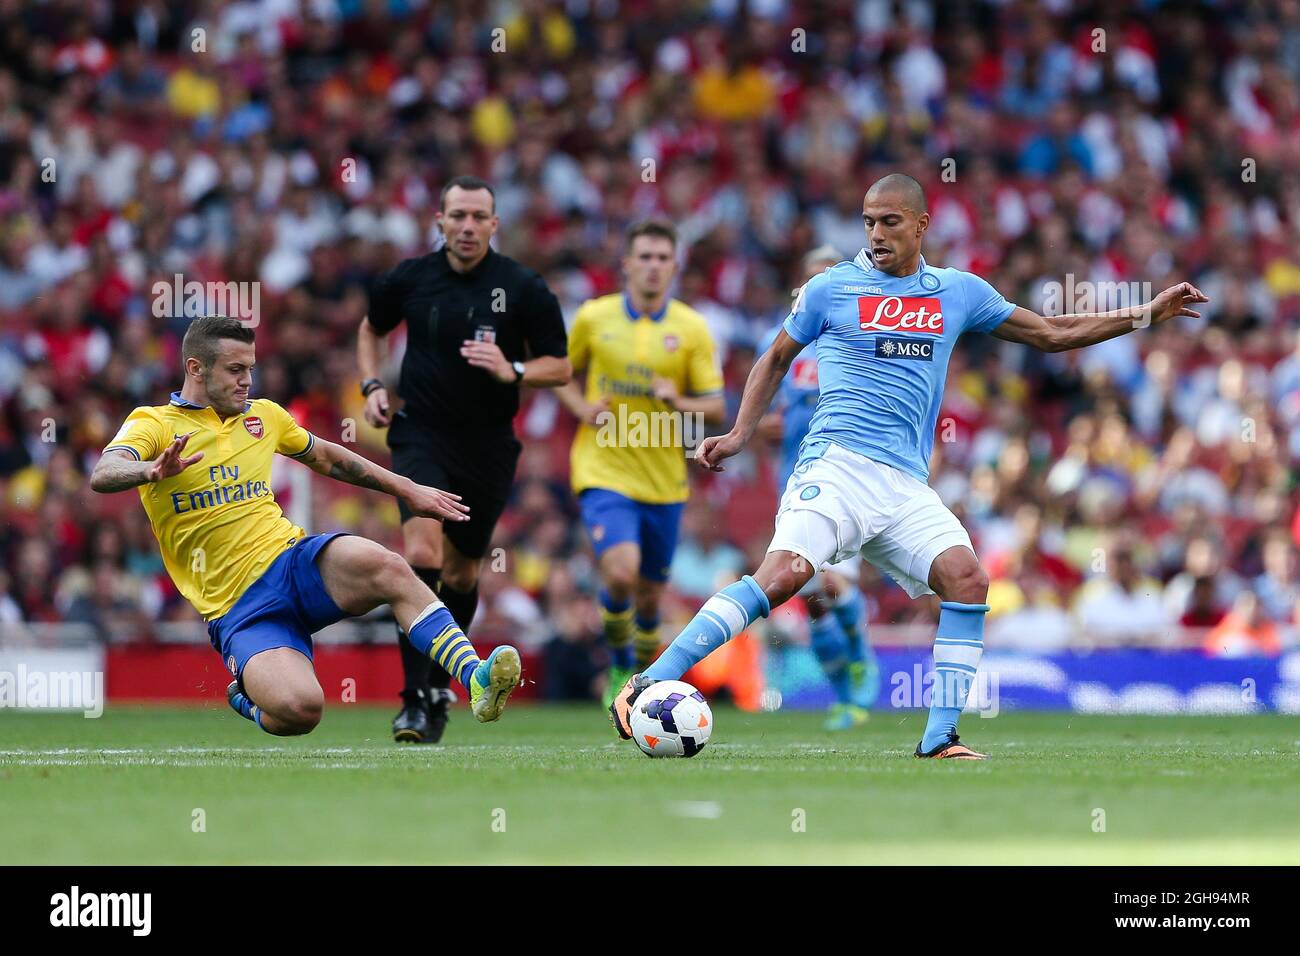 Jack Wilshere of Arsenal goes in on Napoli's Gokhan Inler during the Emirates Cup 2013 between Arsenal and Napoli at the Emirates Stadium in London on August 03, 2013. Stock Photo